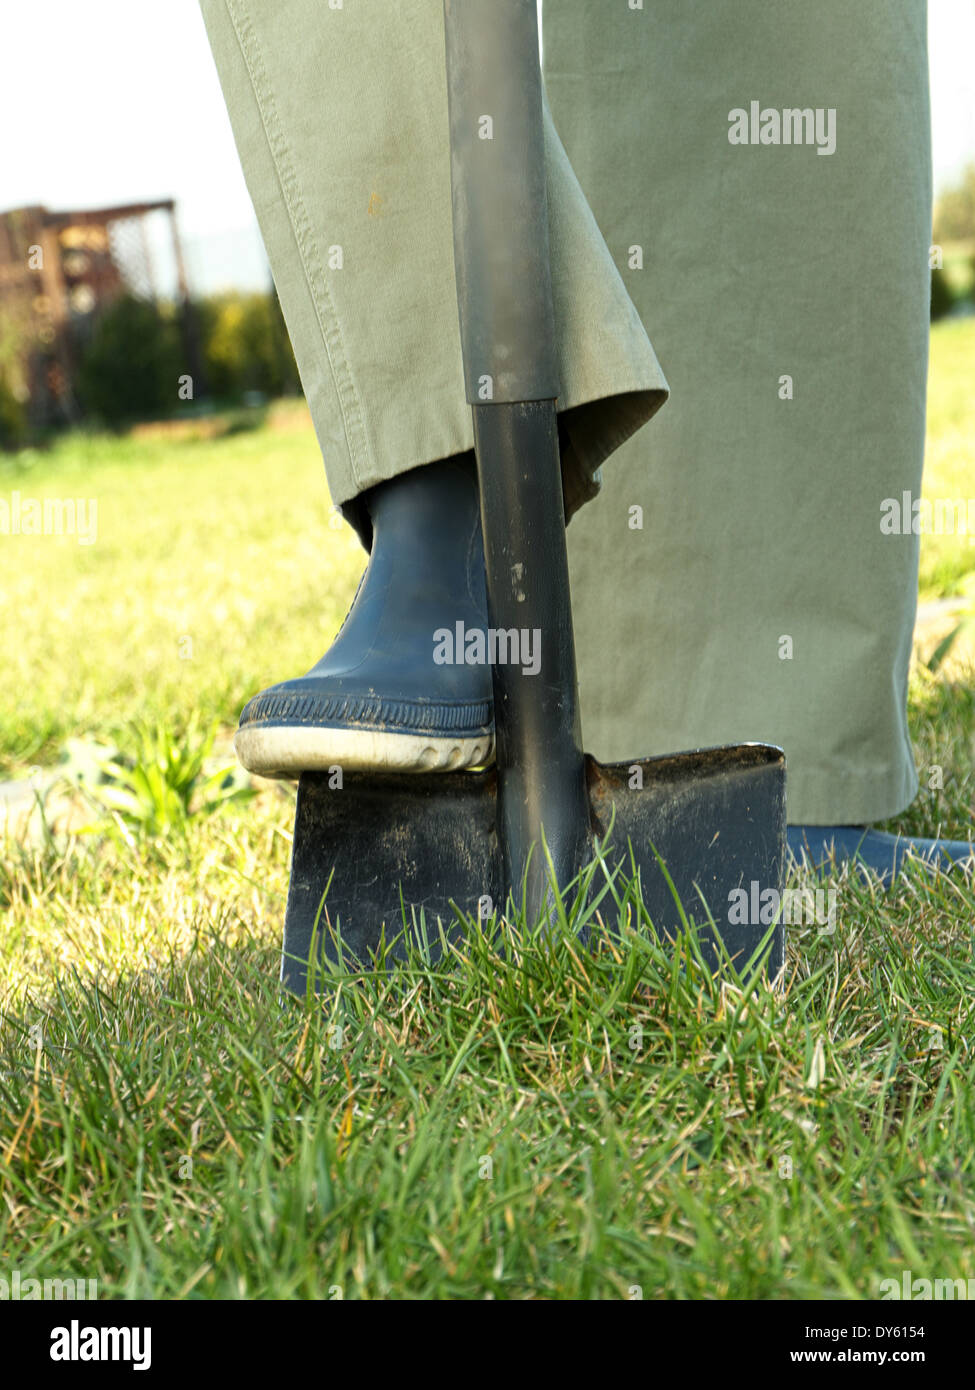 Gardener digging a hole with spade in the garden Stock Photo